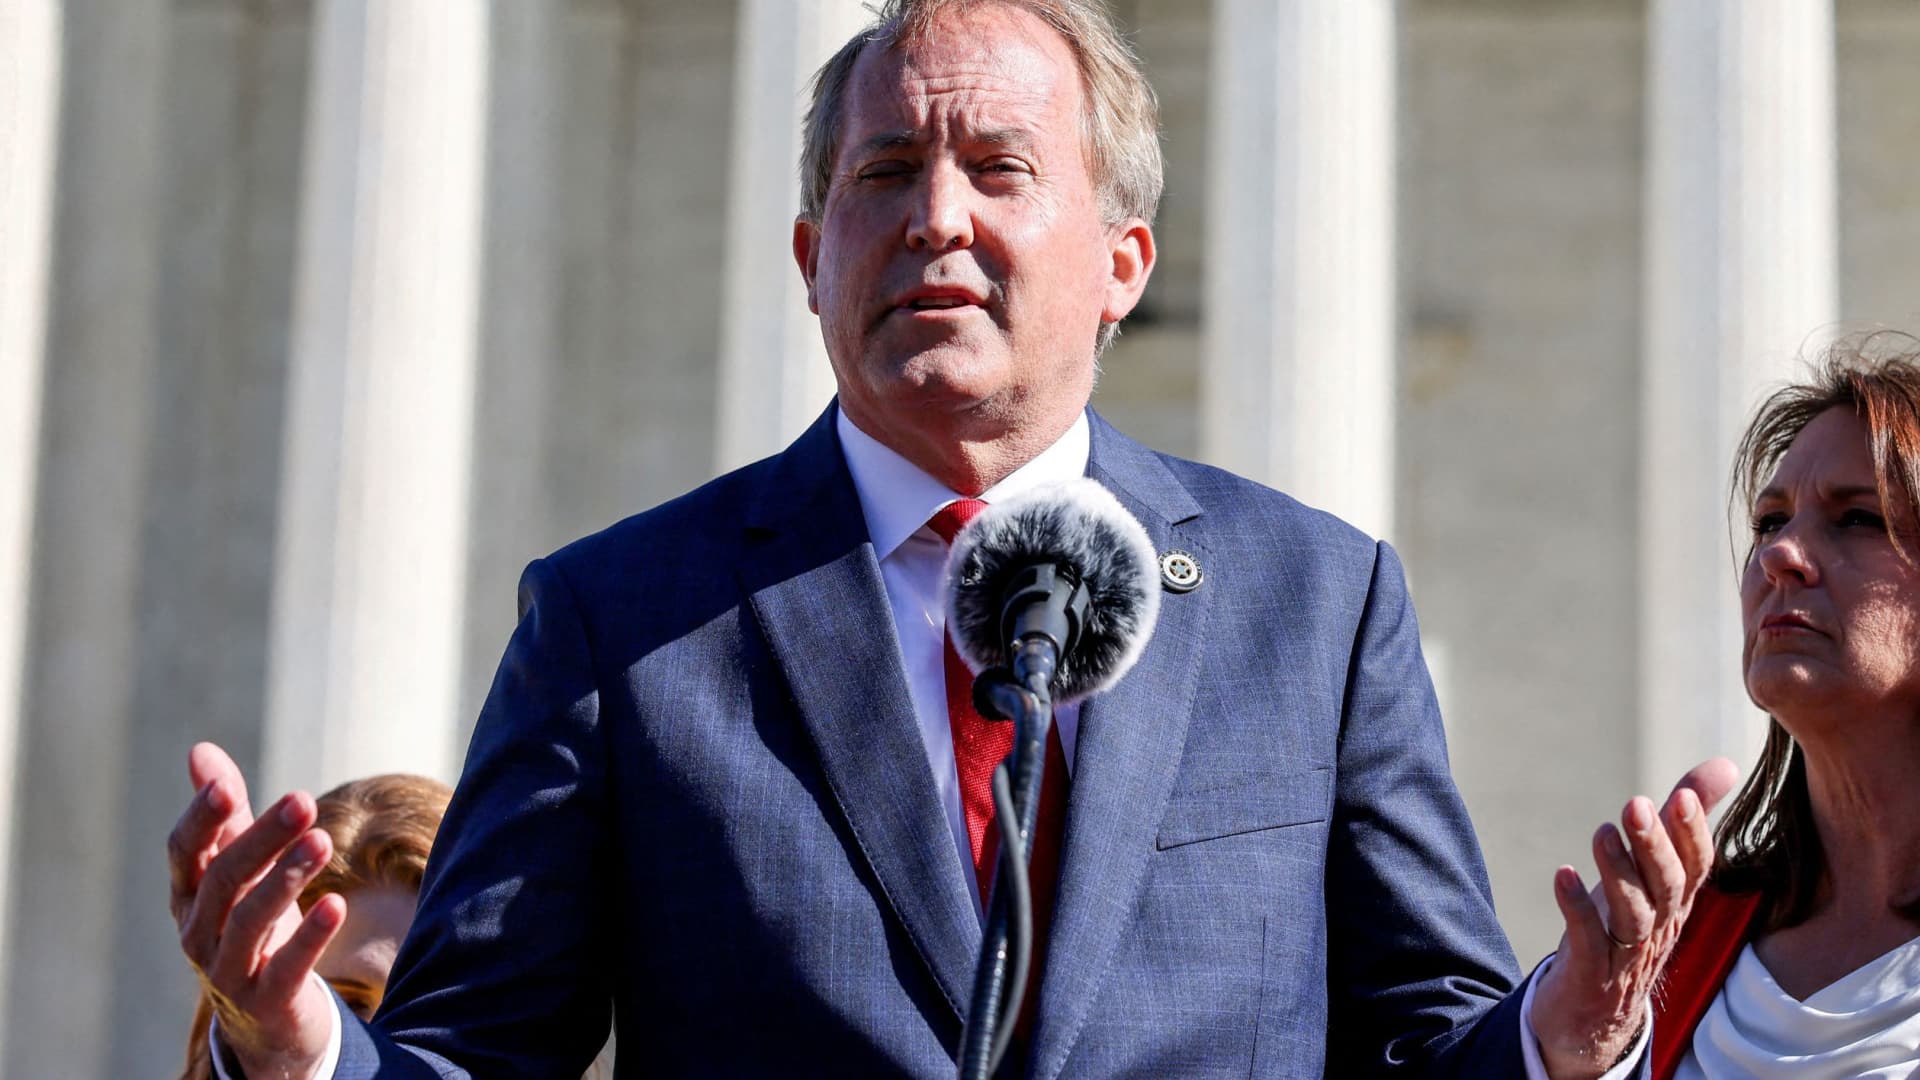 Fight still ahead for Texas' Ken Paxton after historic impeachment deepens GOP divisions